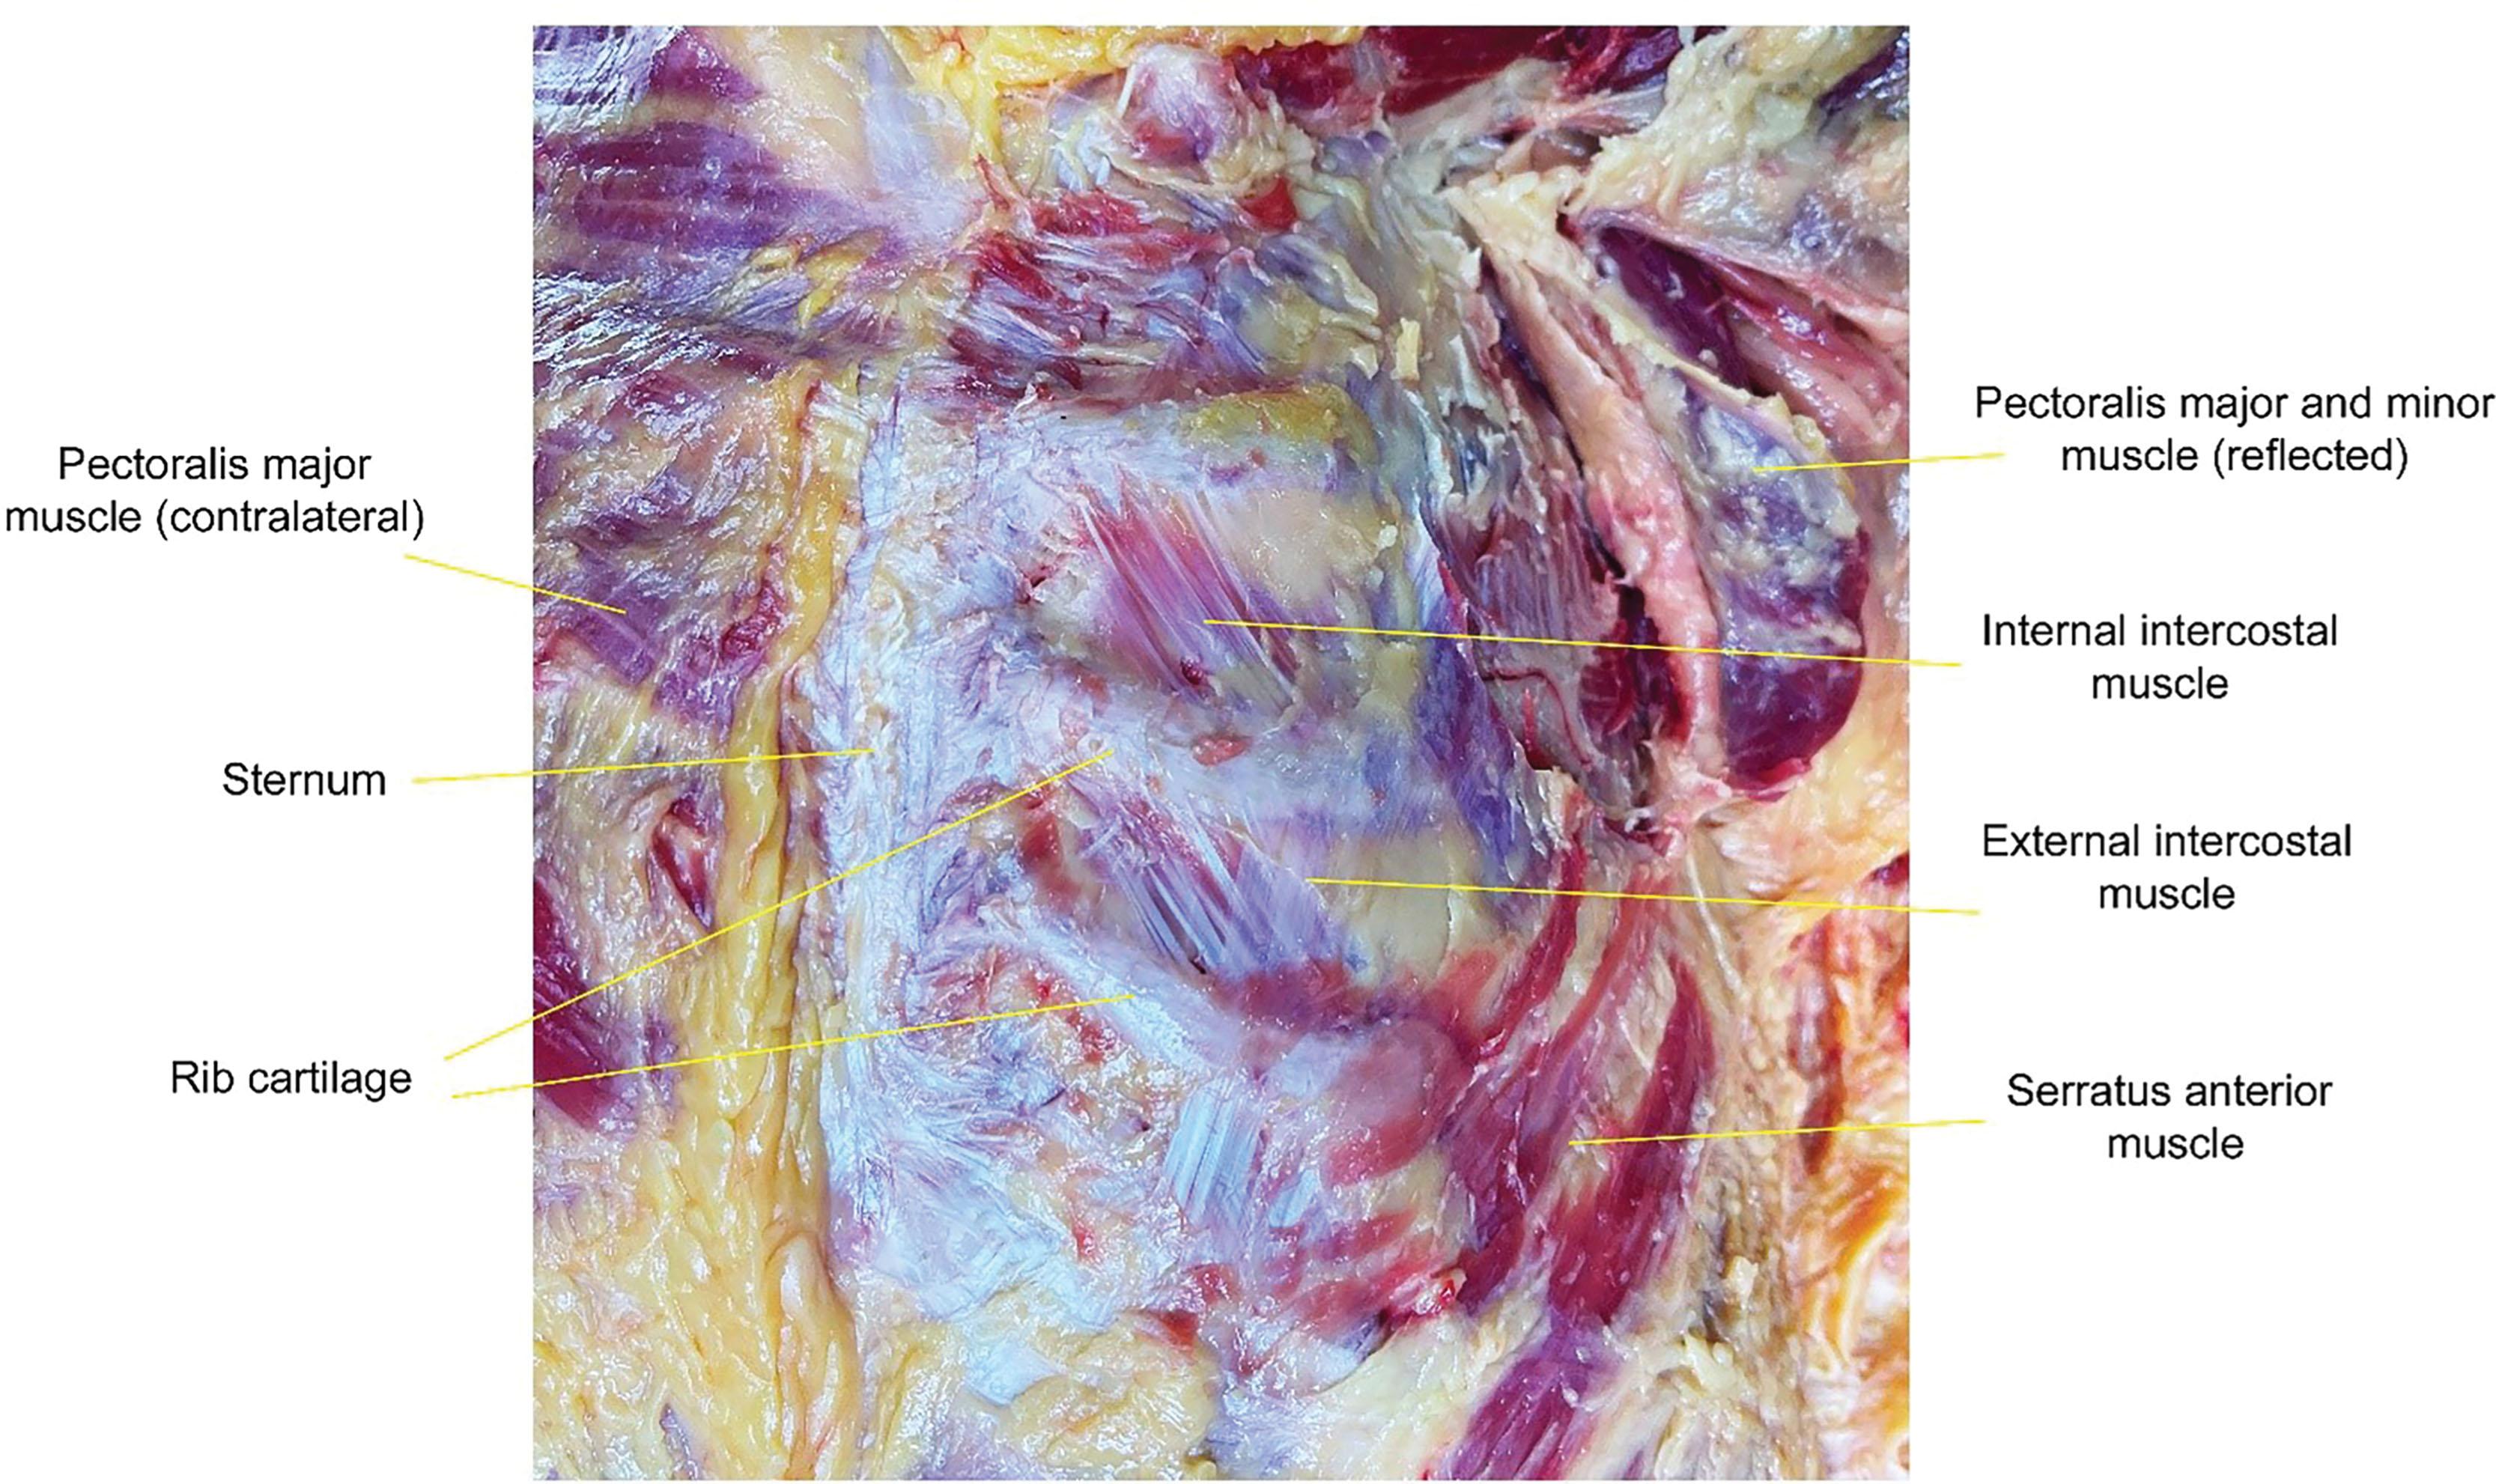 Figure 10.5, Cadaver dissection of the anterior chest showing the intercostal muscles.